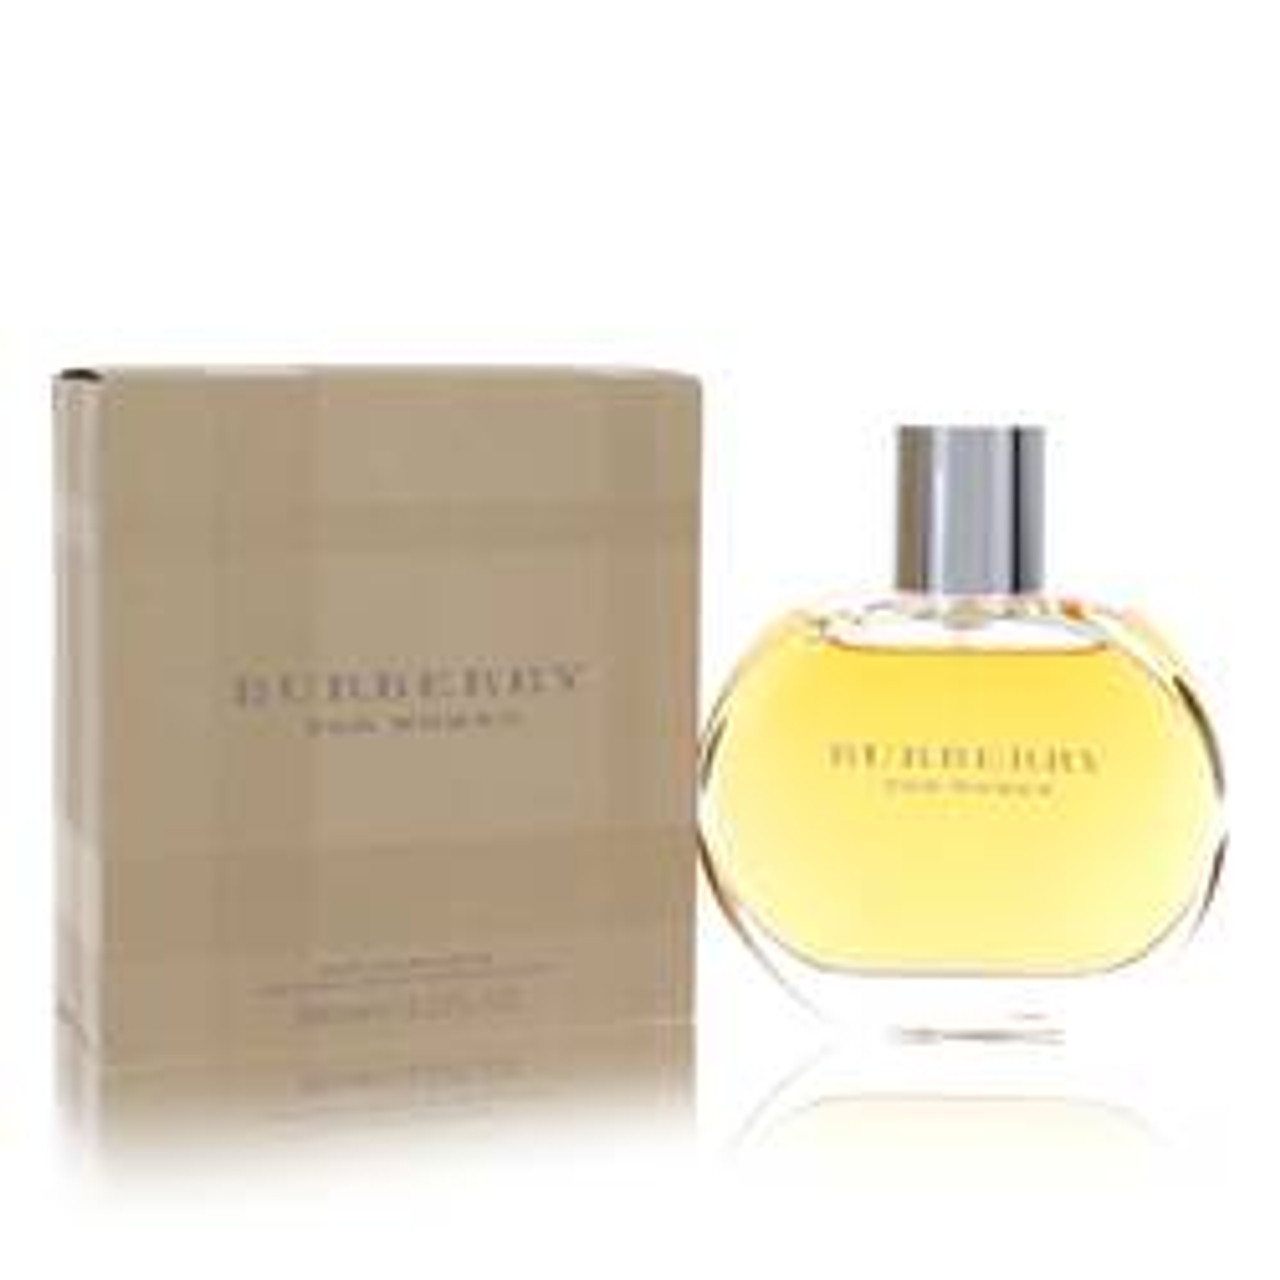 Burberry Perfume By Burberry Eau De Parfum Spray 3.3 oz for Women - [From 140.00 - Choose pk Qty ] - *Ships from Miami